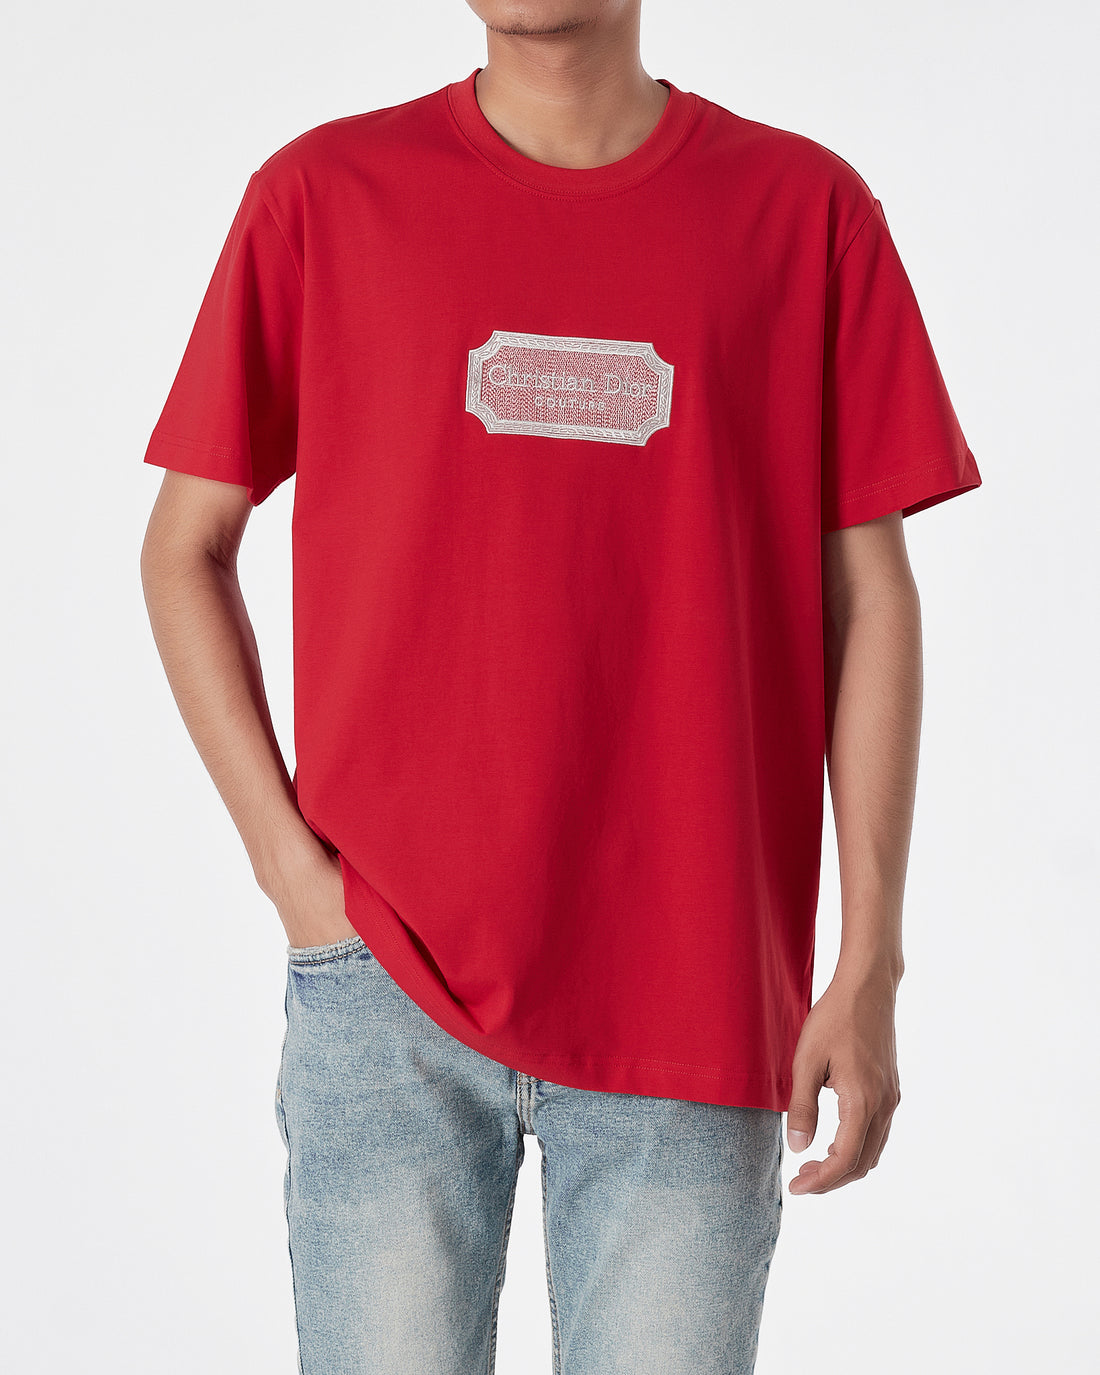 CD Logo Embroidered Unisex Red T-Shirt 15.90